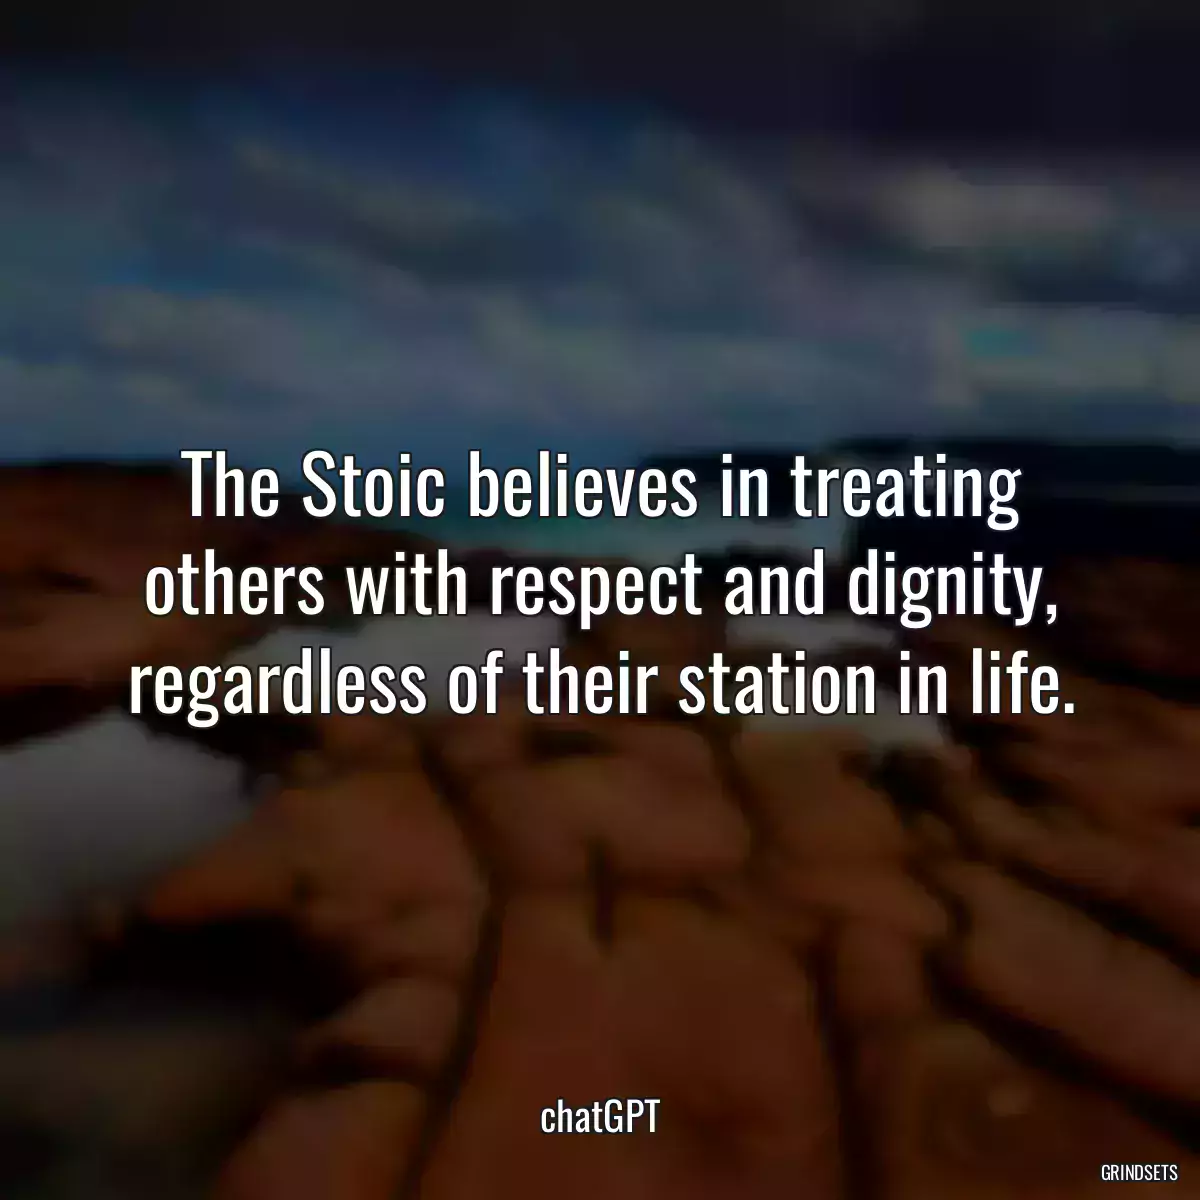 The Stoic believes in treating others with respect and dignity, regardless of their station in life.